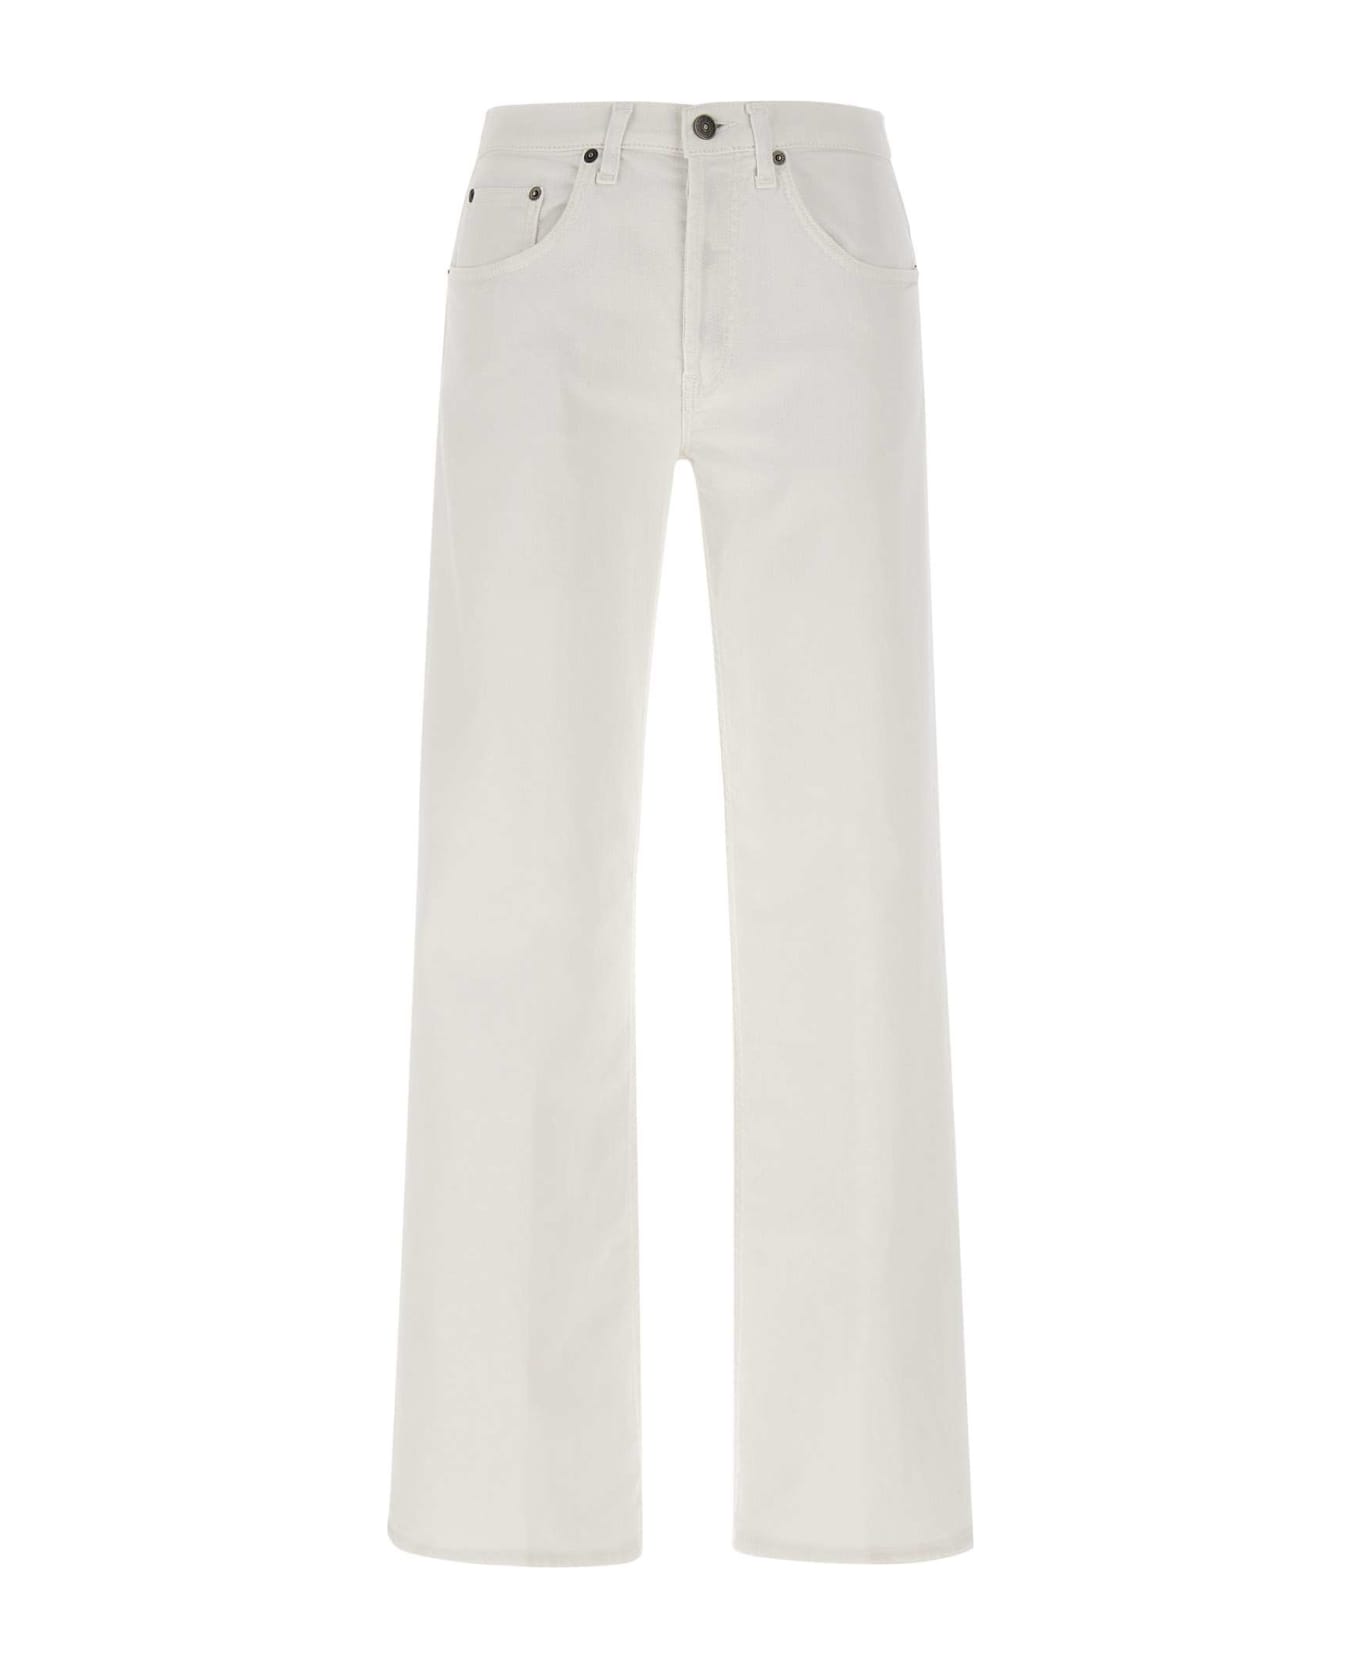 Dondup 'jacklyn' Cotton Jeans - WHITE デニム